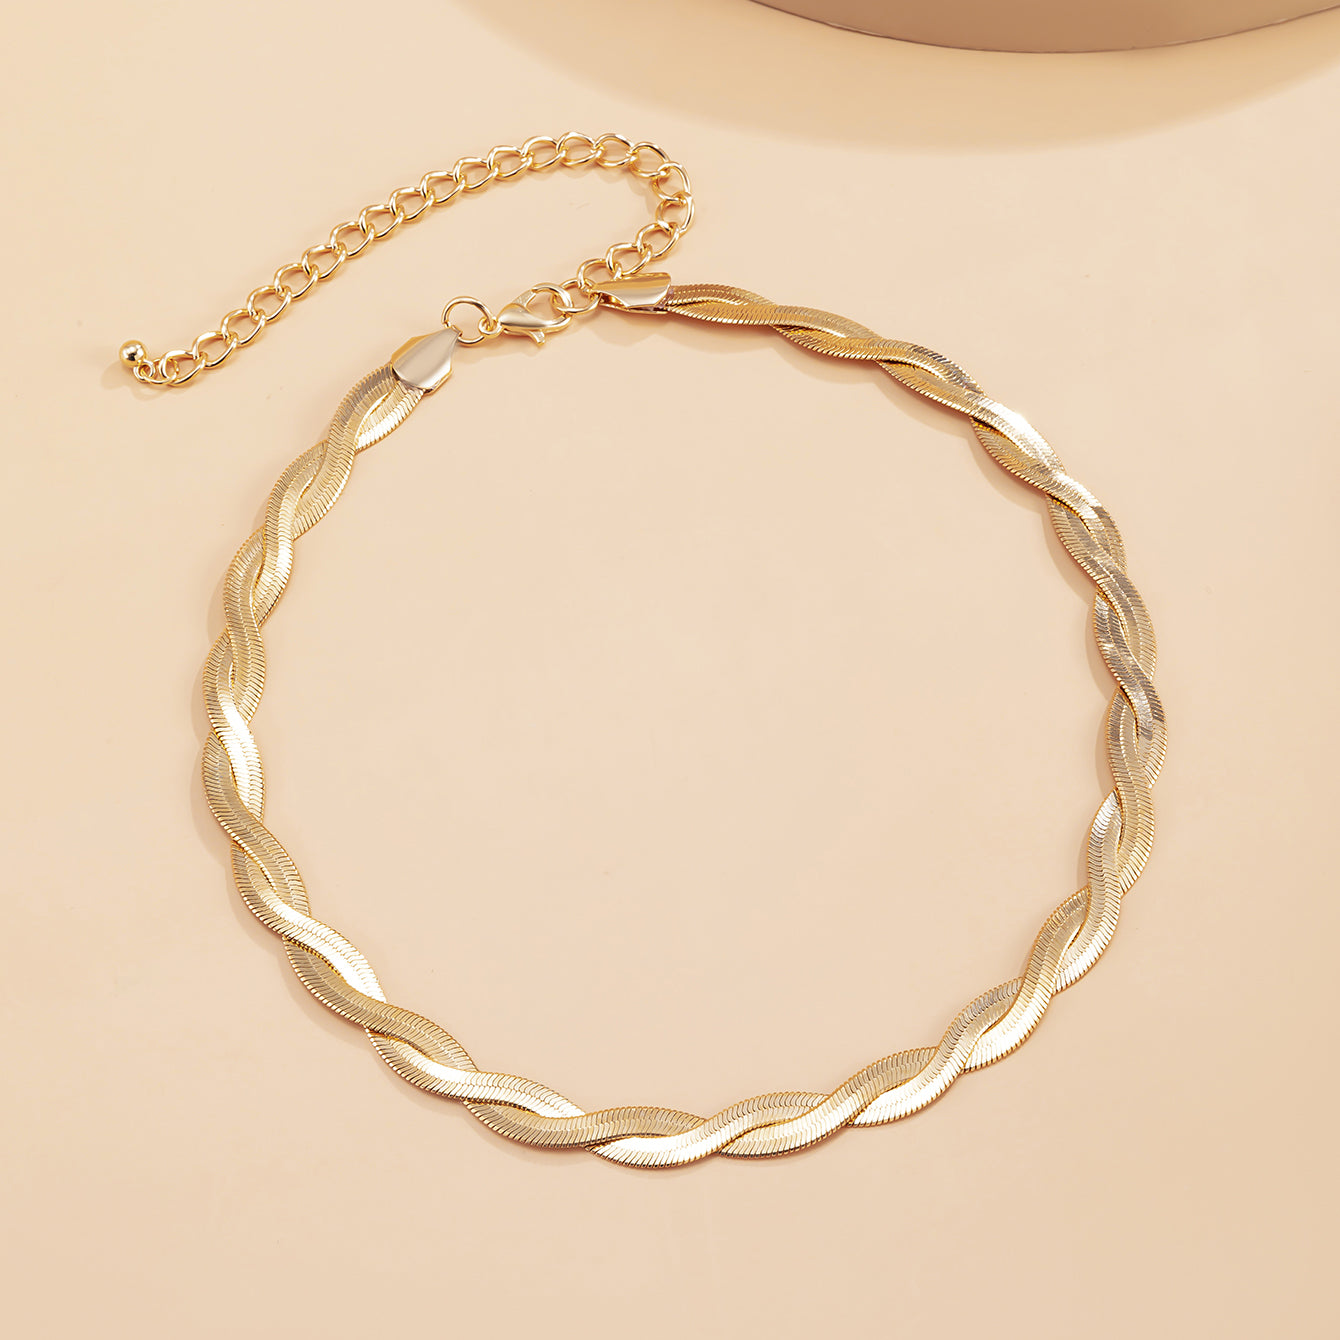 Elegant and Stylish: 1 Piece Braided Chain Necklace - Perfect for Any Occasion!